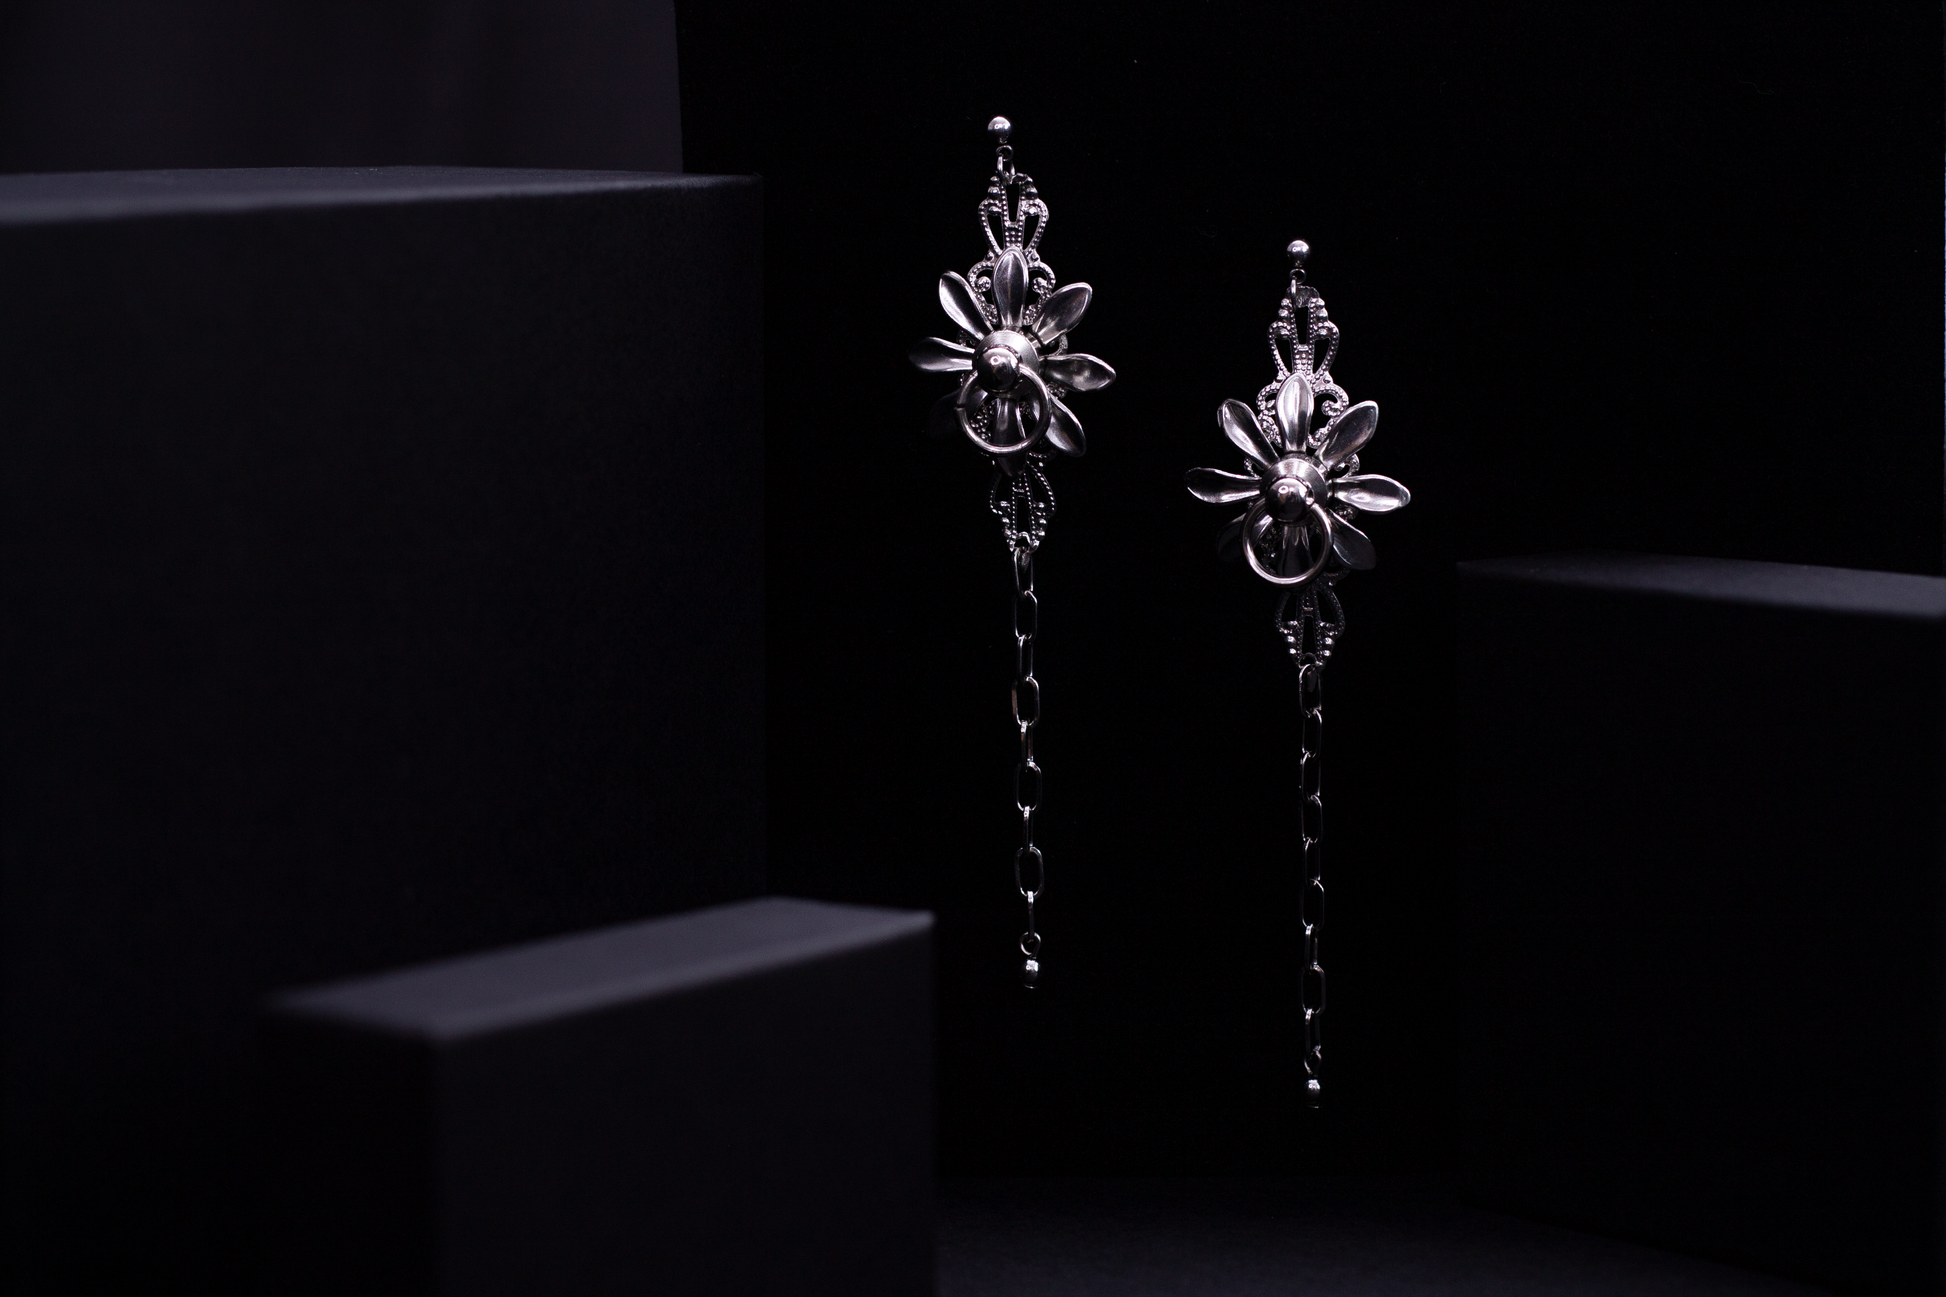 Adorned with Myril Jewels' neo-gothic floral earring, this image captures a sleek design ideal for gothic-chic enthusiasts. The earring showcases a floral motif set in dark, polished metal with a cascading chain detail, blending everyday wear with a bold statement perfect for Halloween, rave parties, or as a distinctive goth girlfriend gift